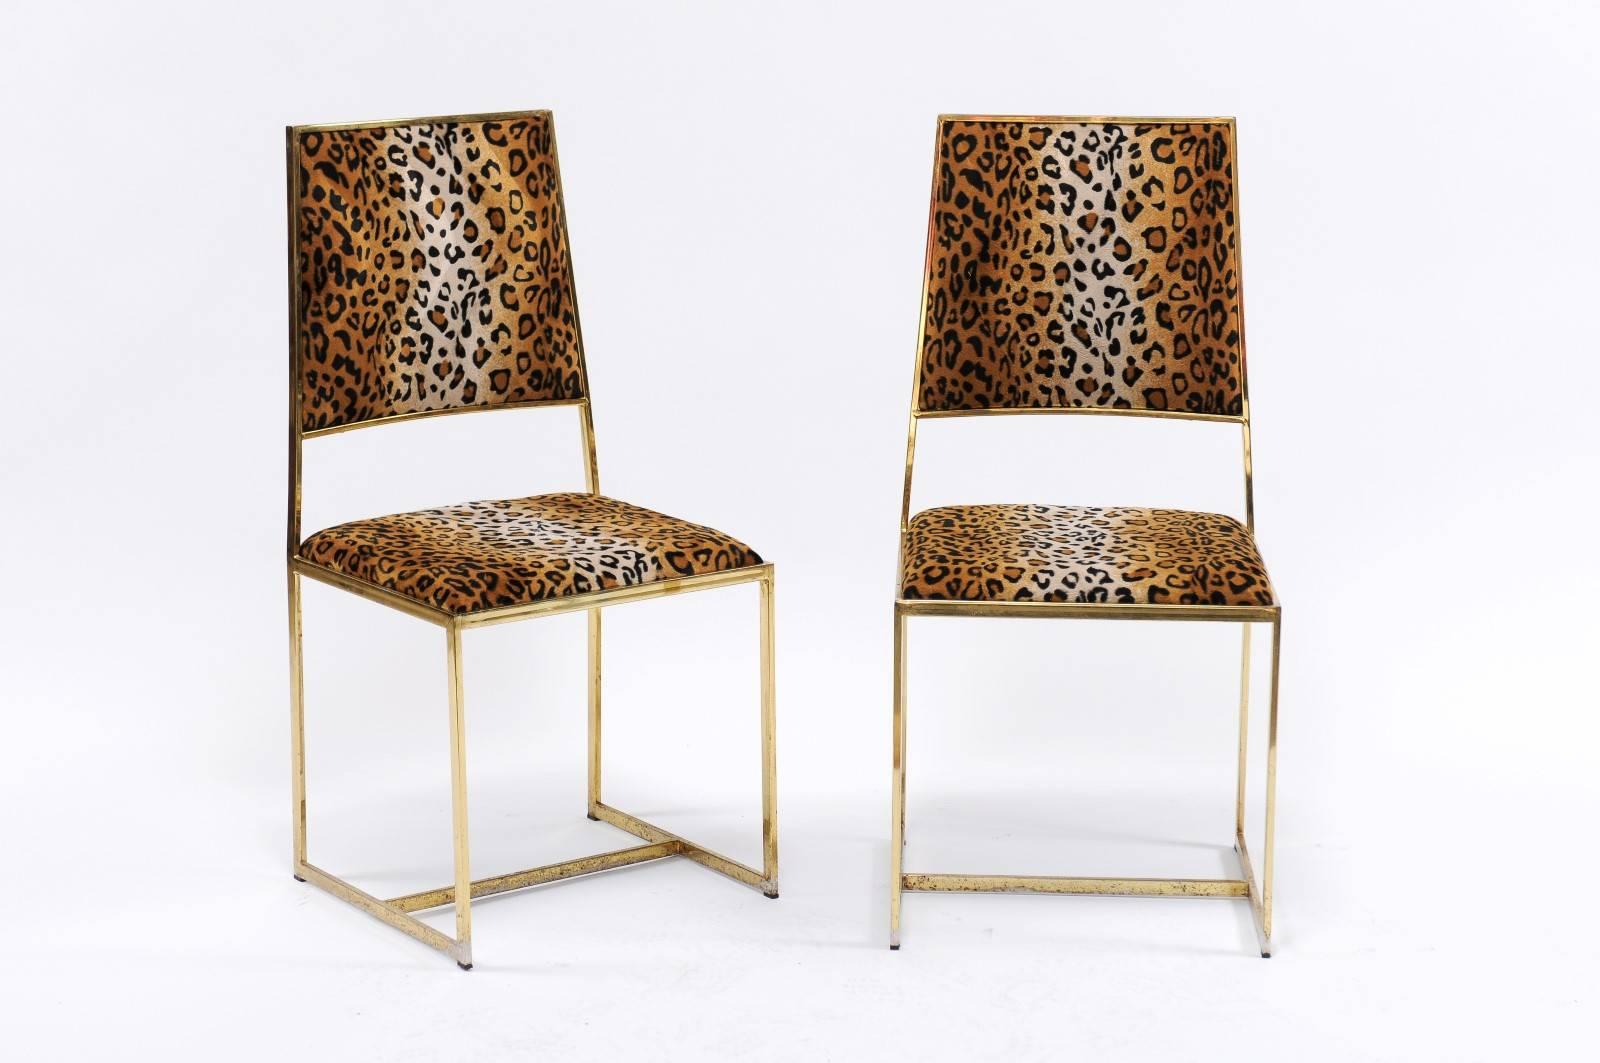 A pair of French vintage animal print upholstered side chairs with brass armature from the 1970s. We currently have two pairs available, priced and sold per pair. We had our eye on this pair of sleek animal print and brass chairs for quite a while,